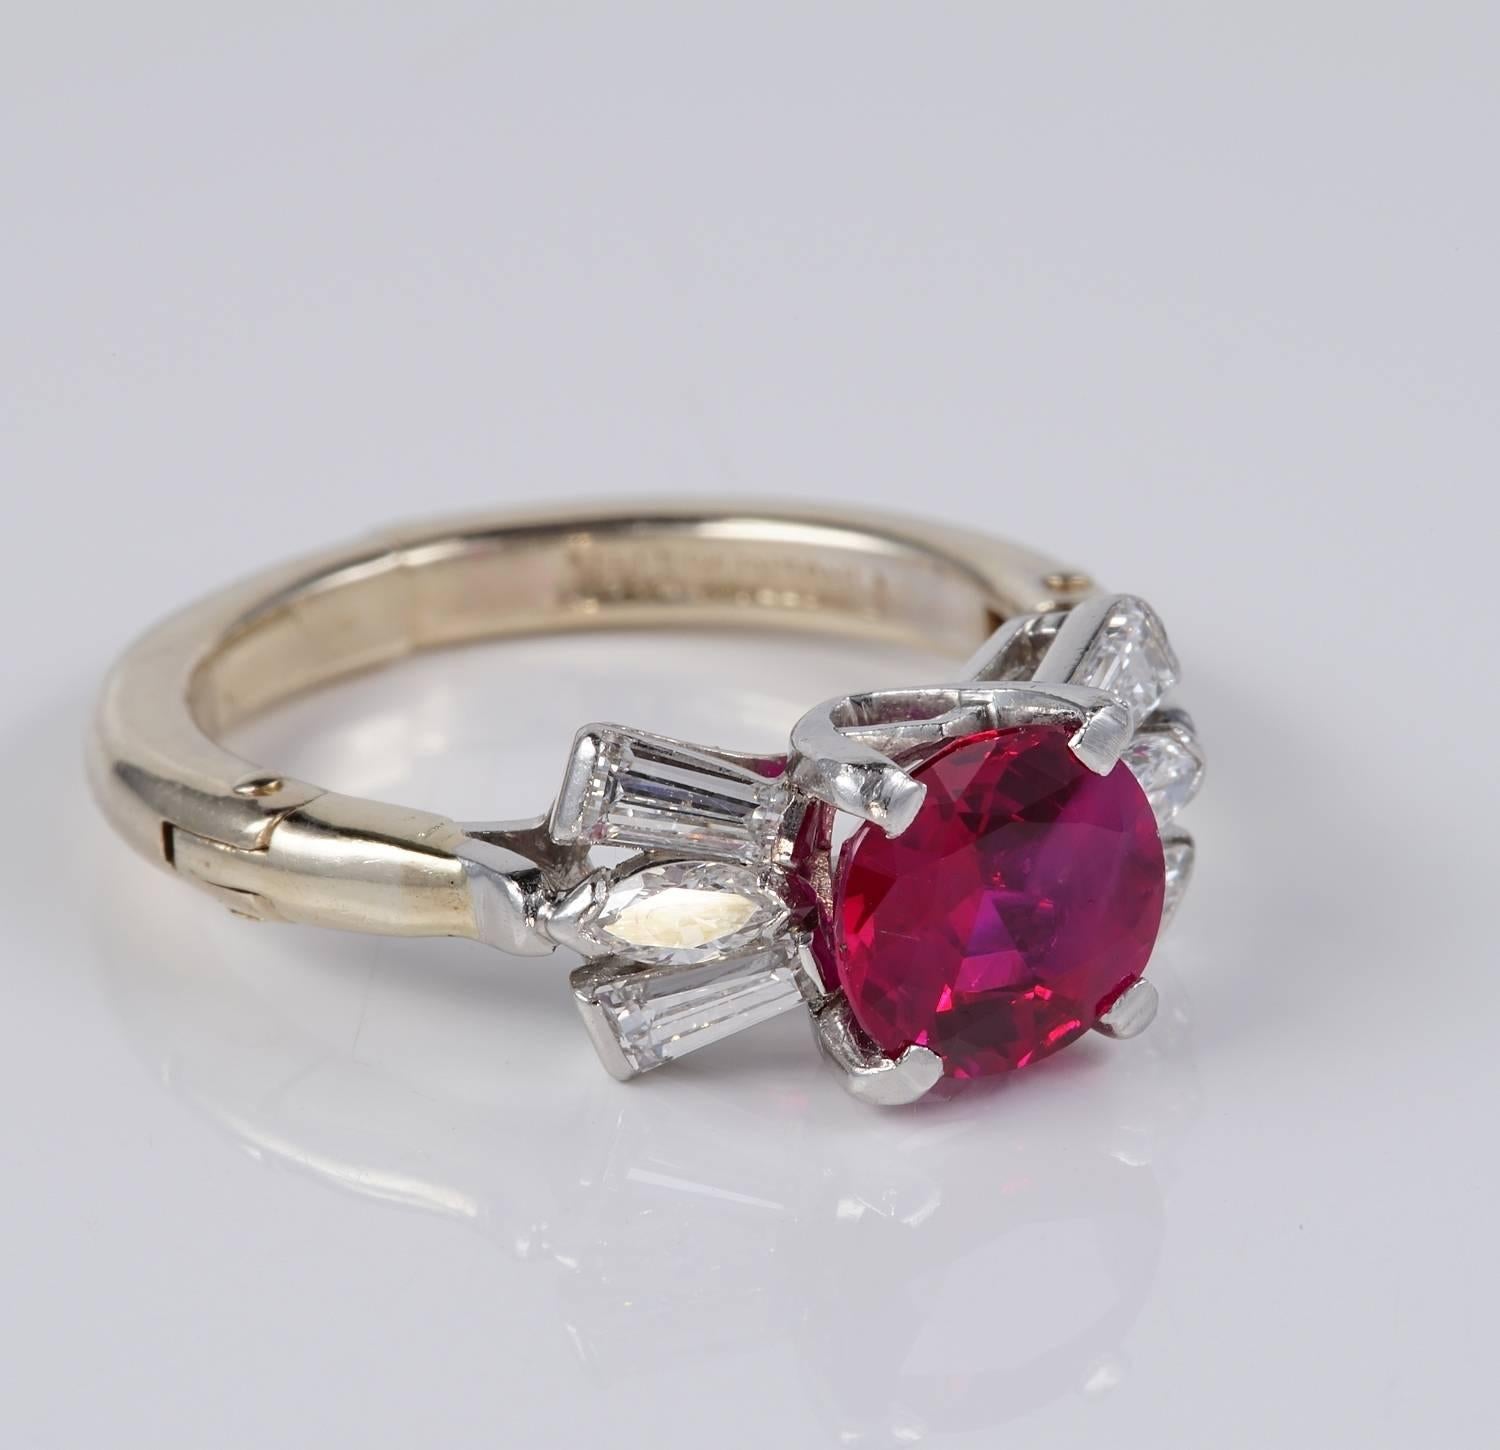 Magnificent natural Burmese Ruby and Diamond dating 60's
Natural untreated Ruby Burma origin of 1.62 Carat supreme vibrant red colour, exceptionally beautiful
Comes fully certified
Diamonds are .70 Ct rated as G VVS 
The ring is beautifully designed